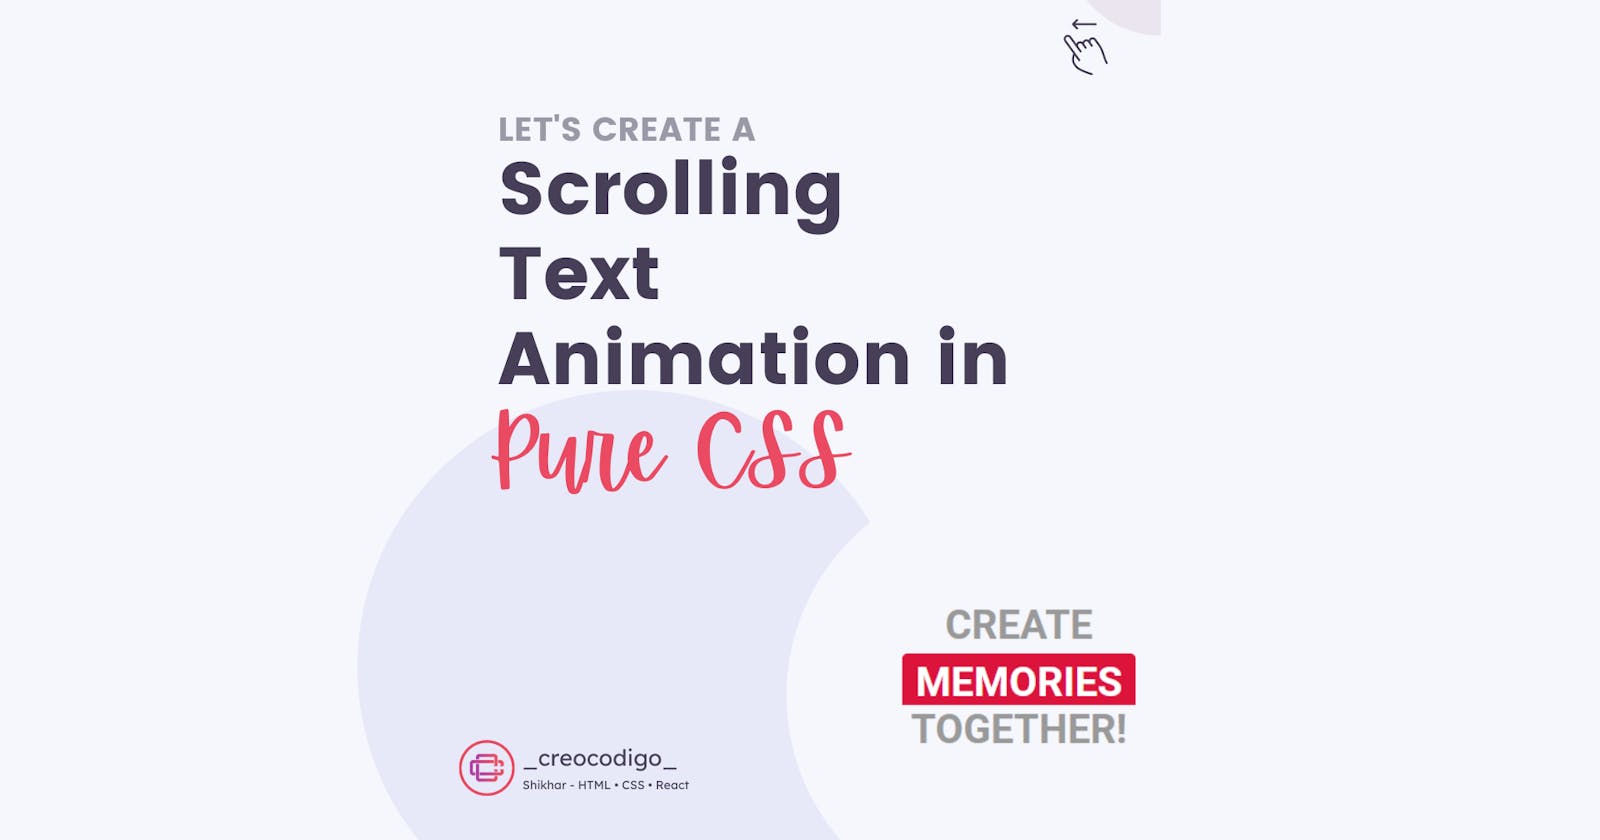 Scrolling Text Animation in Pure CSS